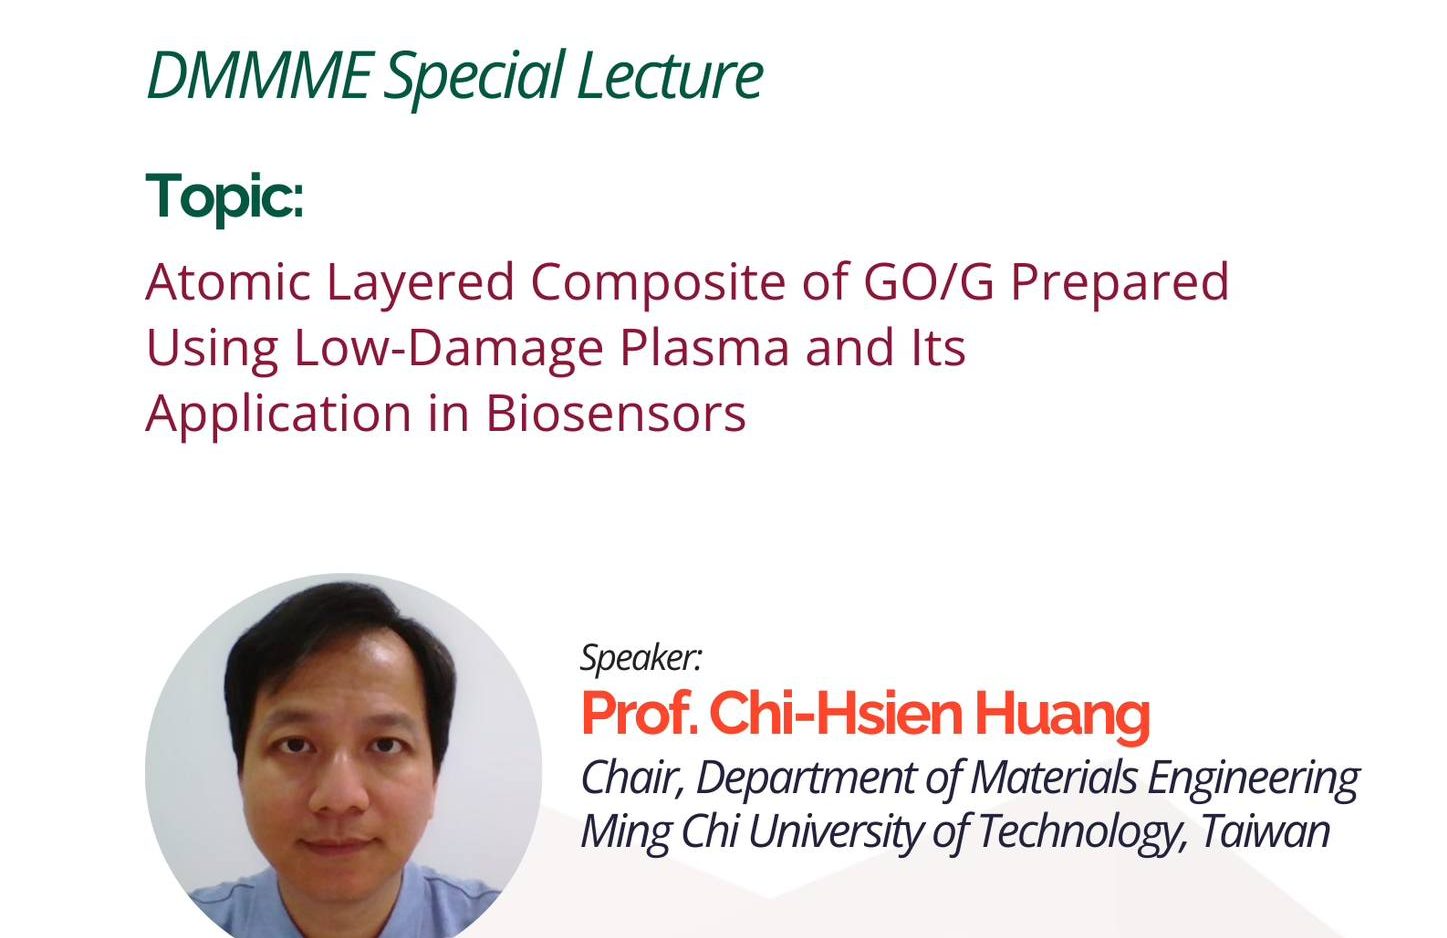 DMMME Special Lecture: Atomic Layered Composite of GO/G Prepared Using Low-Damage Plasma and Its Application in Biosensors